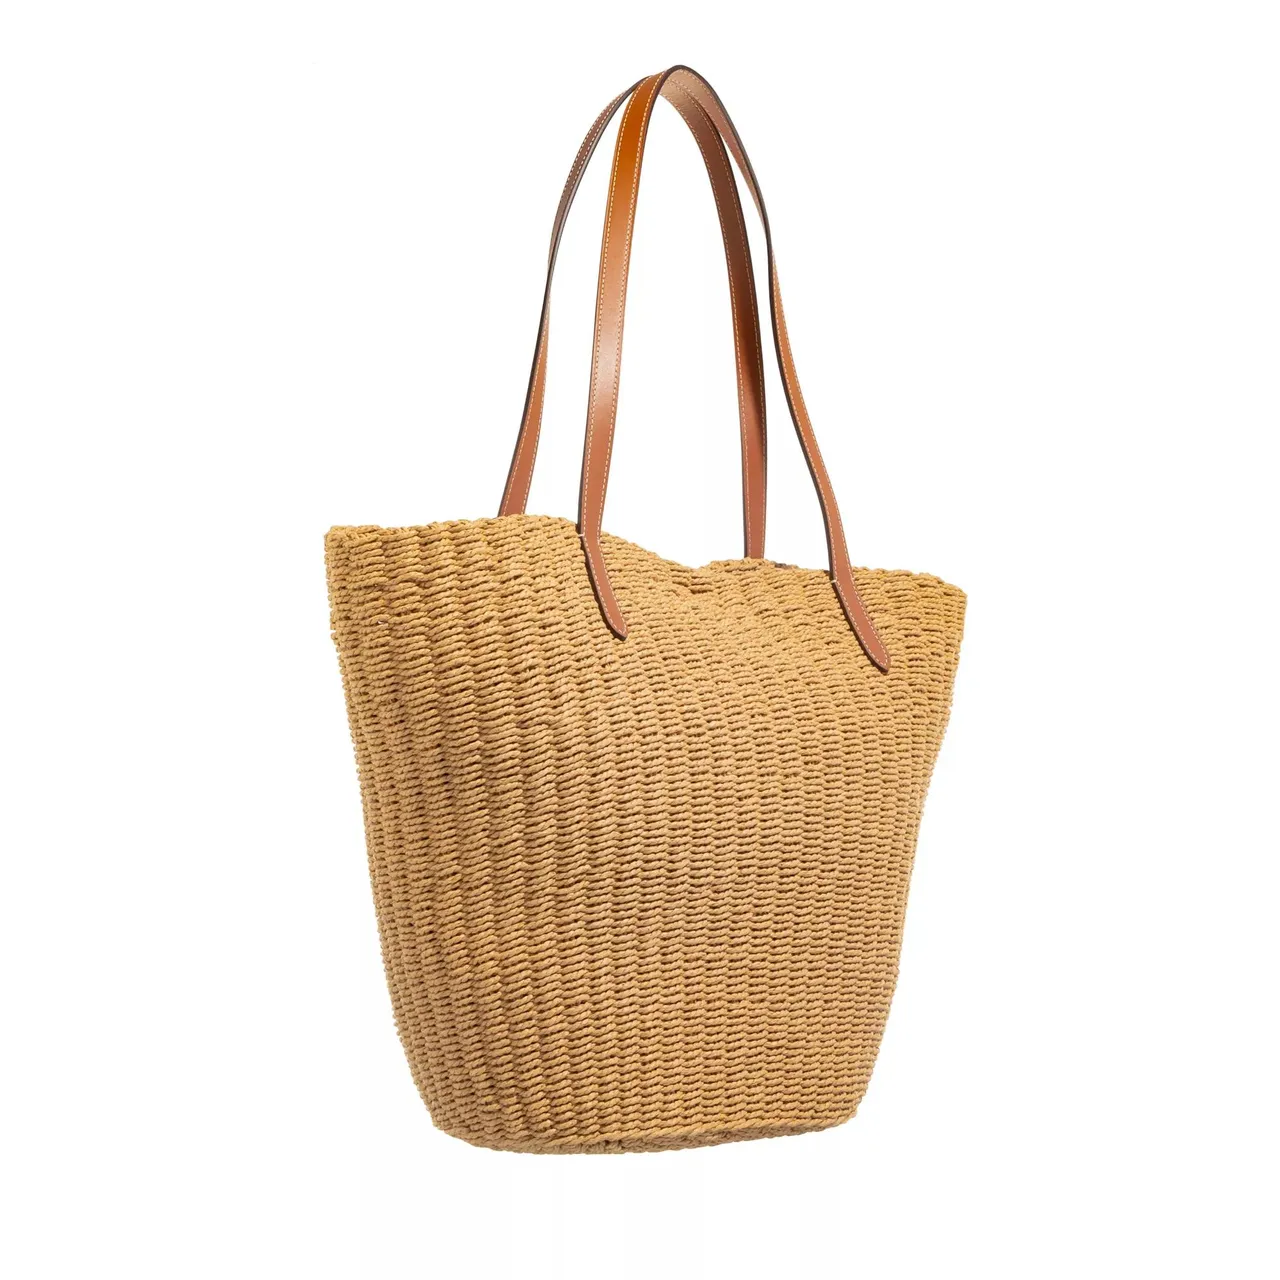 Coach Shopping Bags - Straw Tote - beige - Shopping Bags for ladies